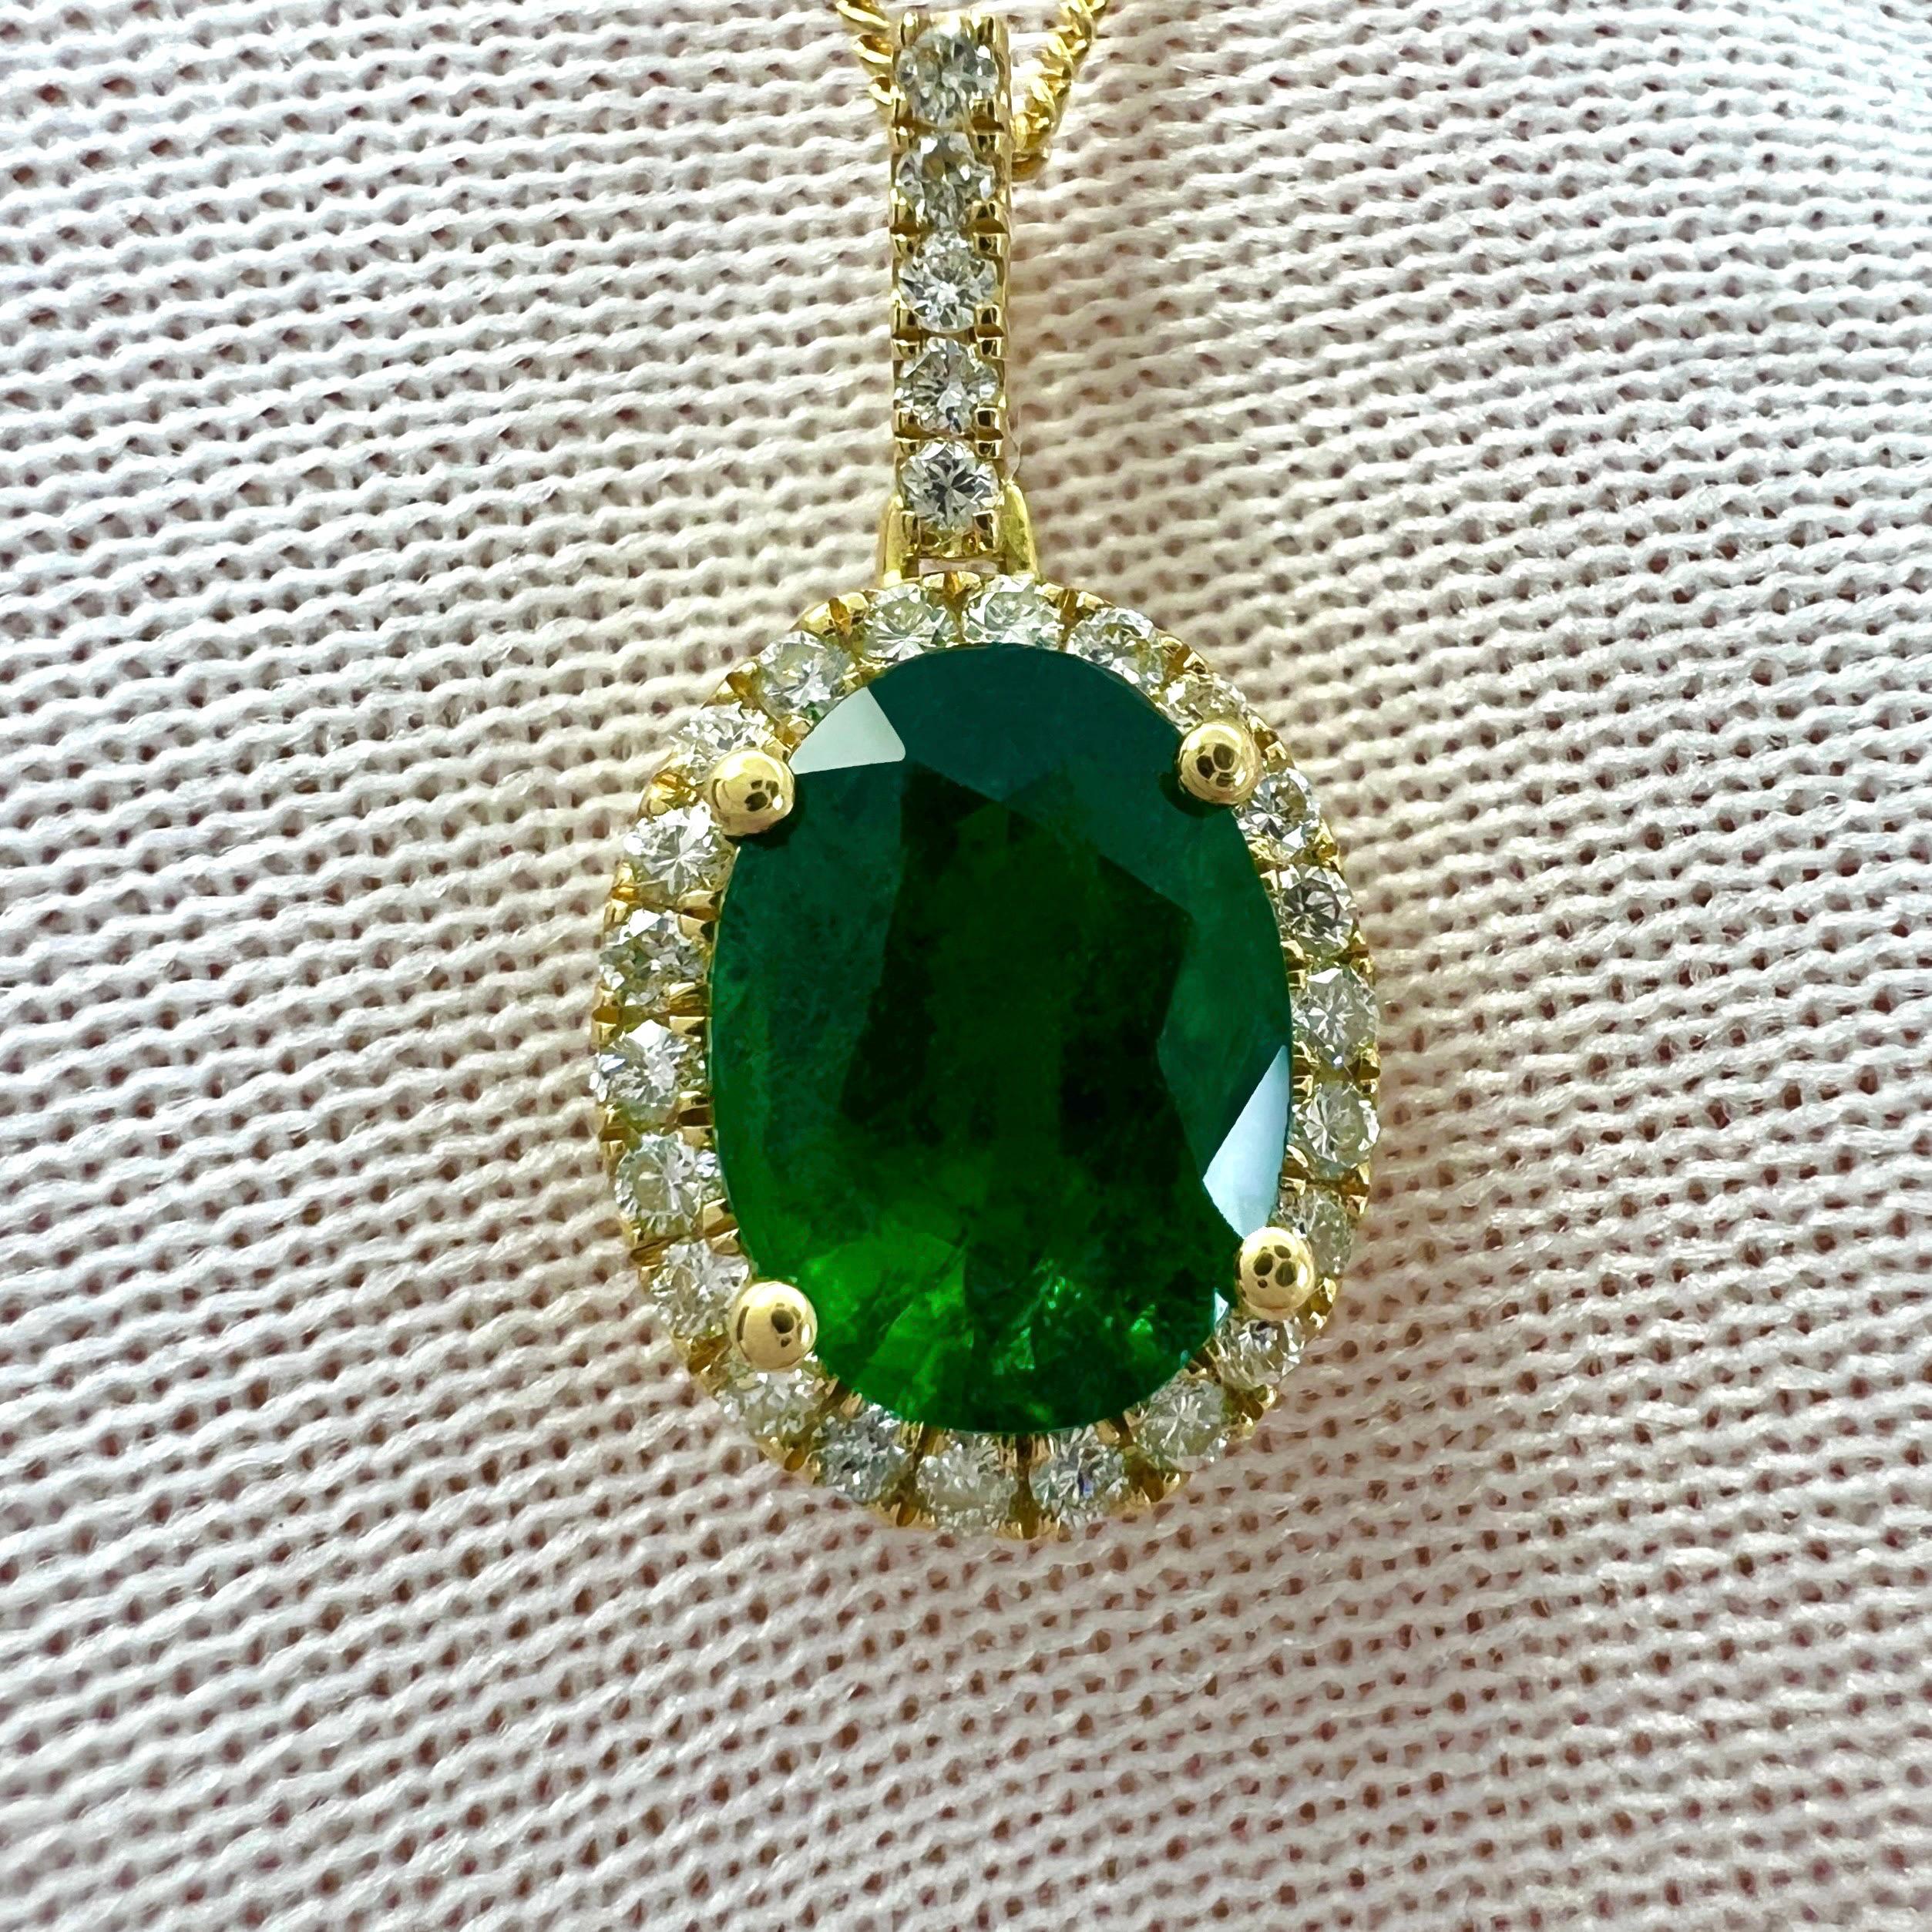 Fine Vivid Green Natural Oval Cut Emerald And Diamond 18k Yellow Gold Halo Pendant. 1.26 Total carat.

1.12ct GIA certified natural emerald with a fine vivid green colour, top grade colour quality, with an excellent oval cut.
This emerald also has